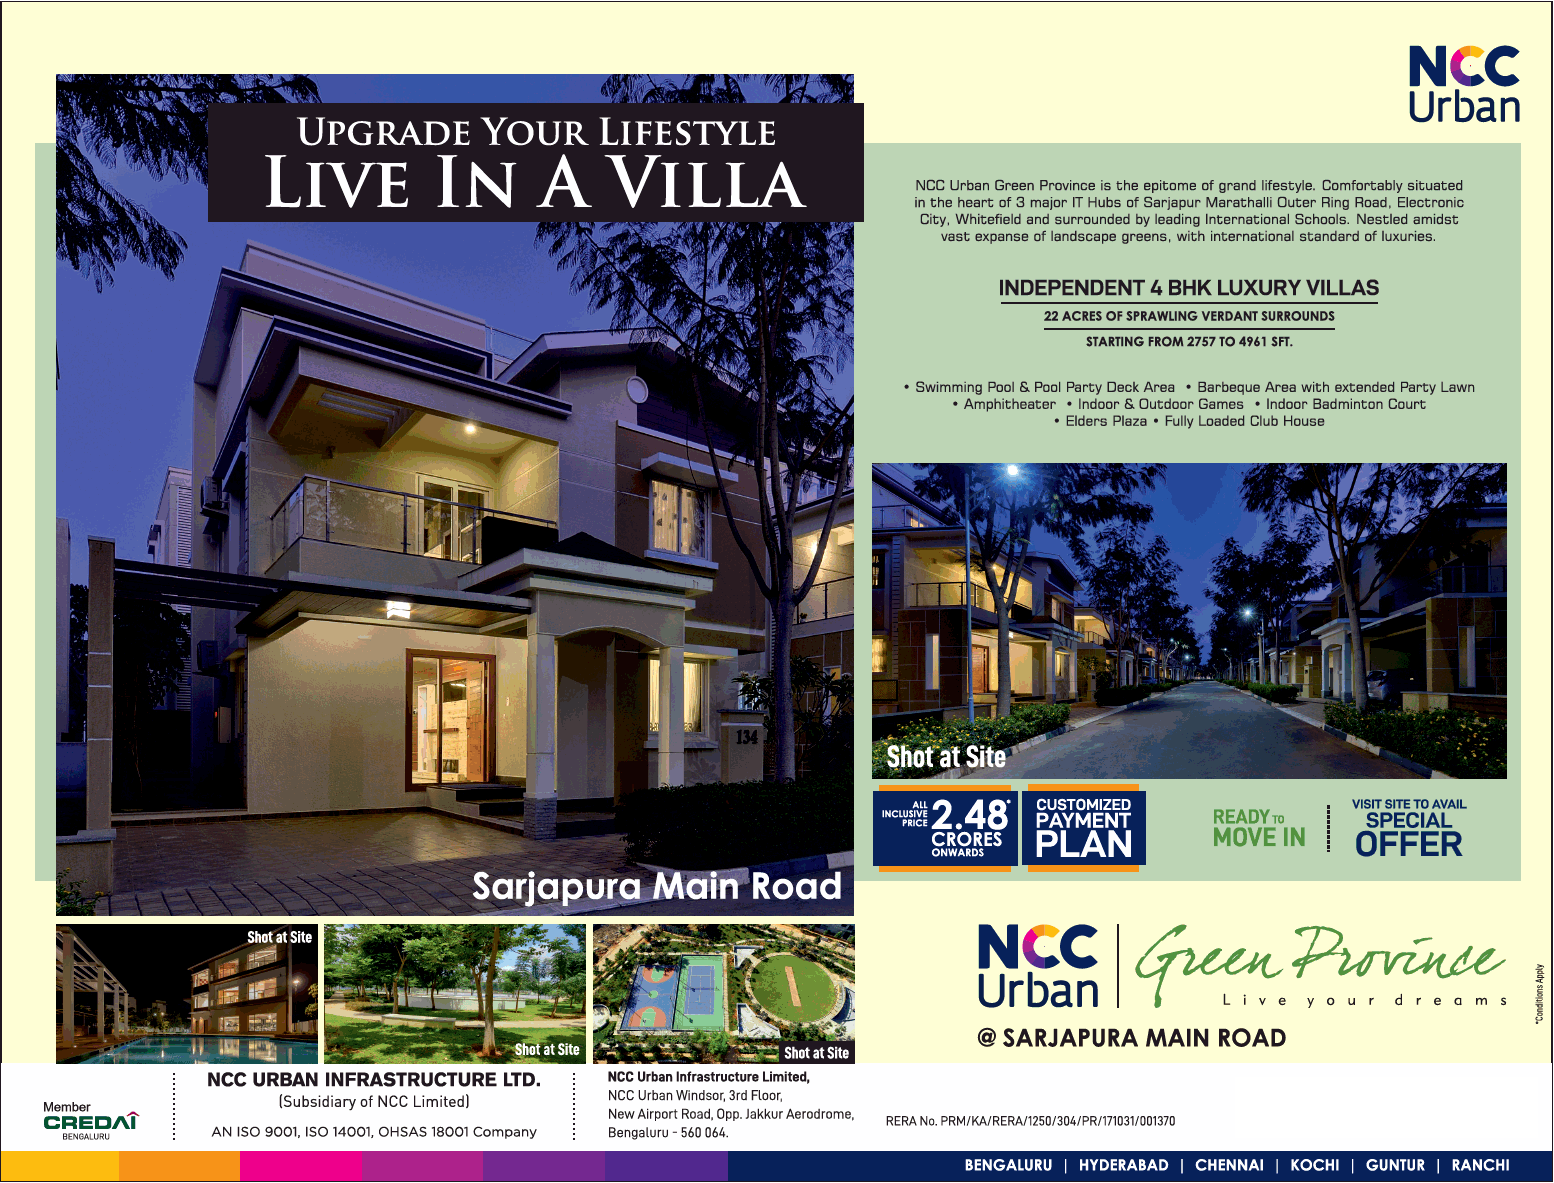 Independent 4 BHK luxury villa at NCC Urban Green Province in Bangalore